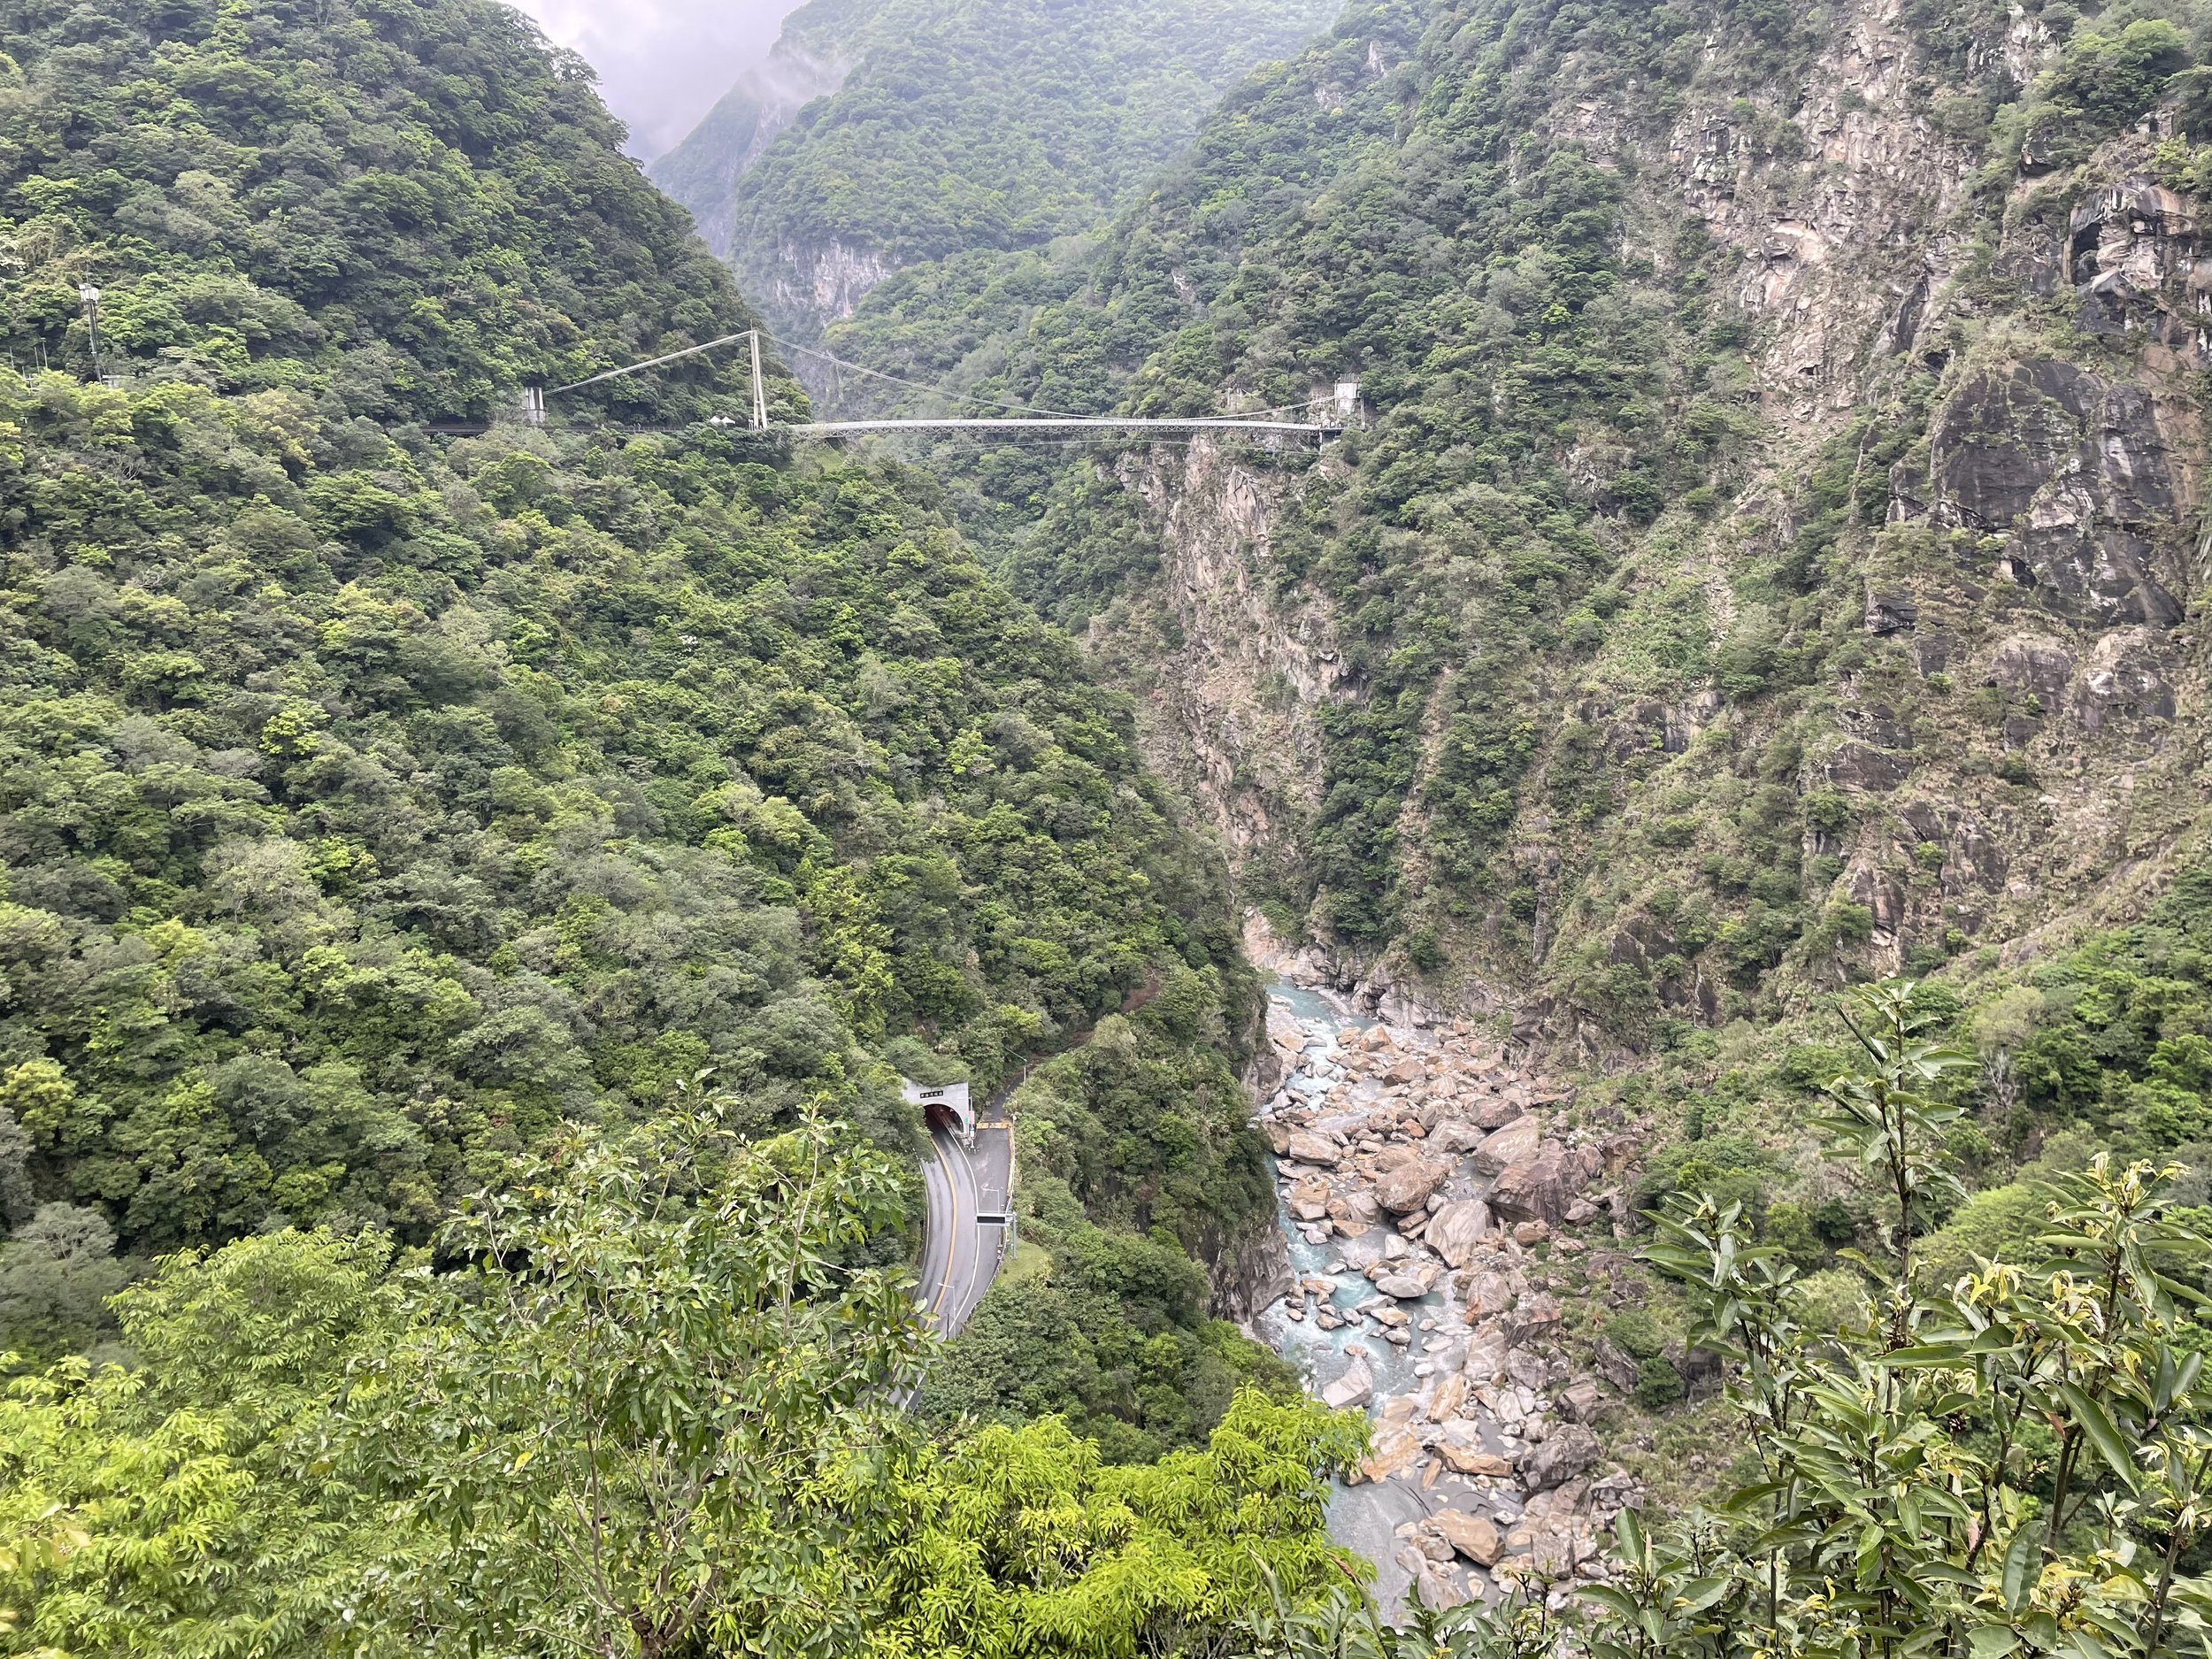 View of the Suspension Bridge and road below from the lower viewpoint, Buluowan Terrace, Taroko Gorge